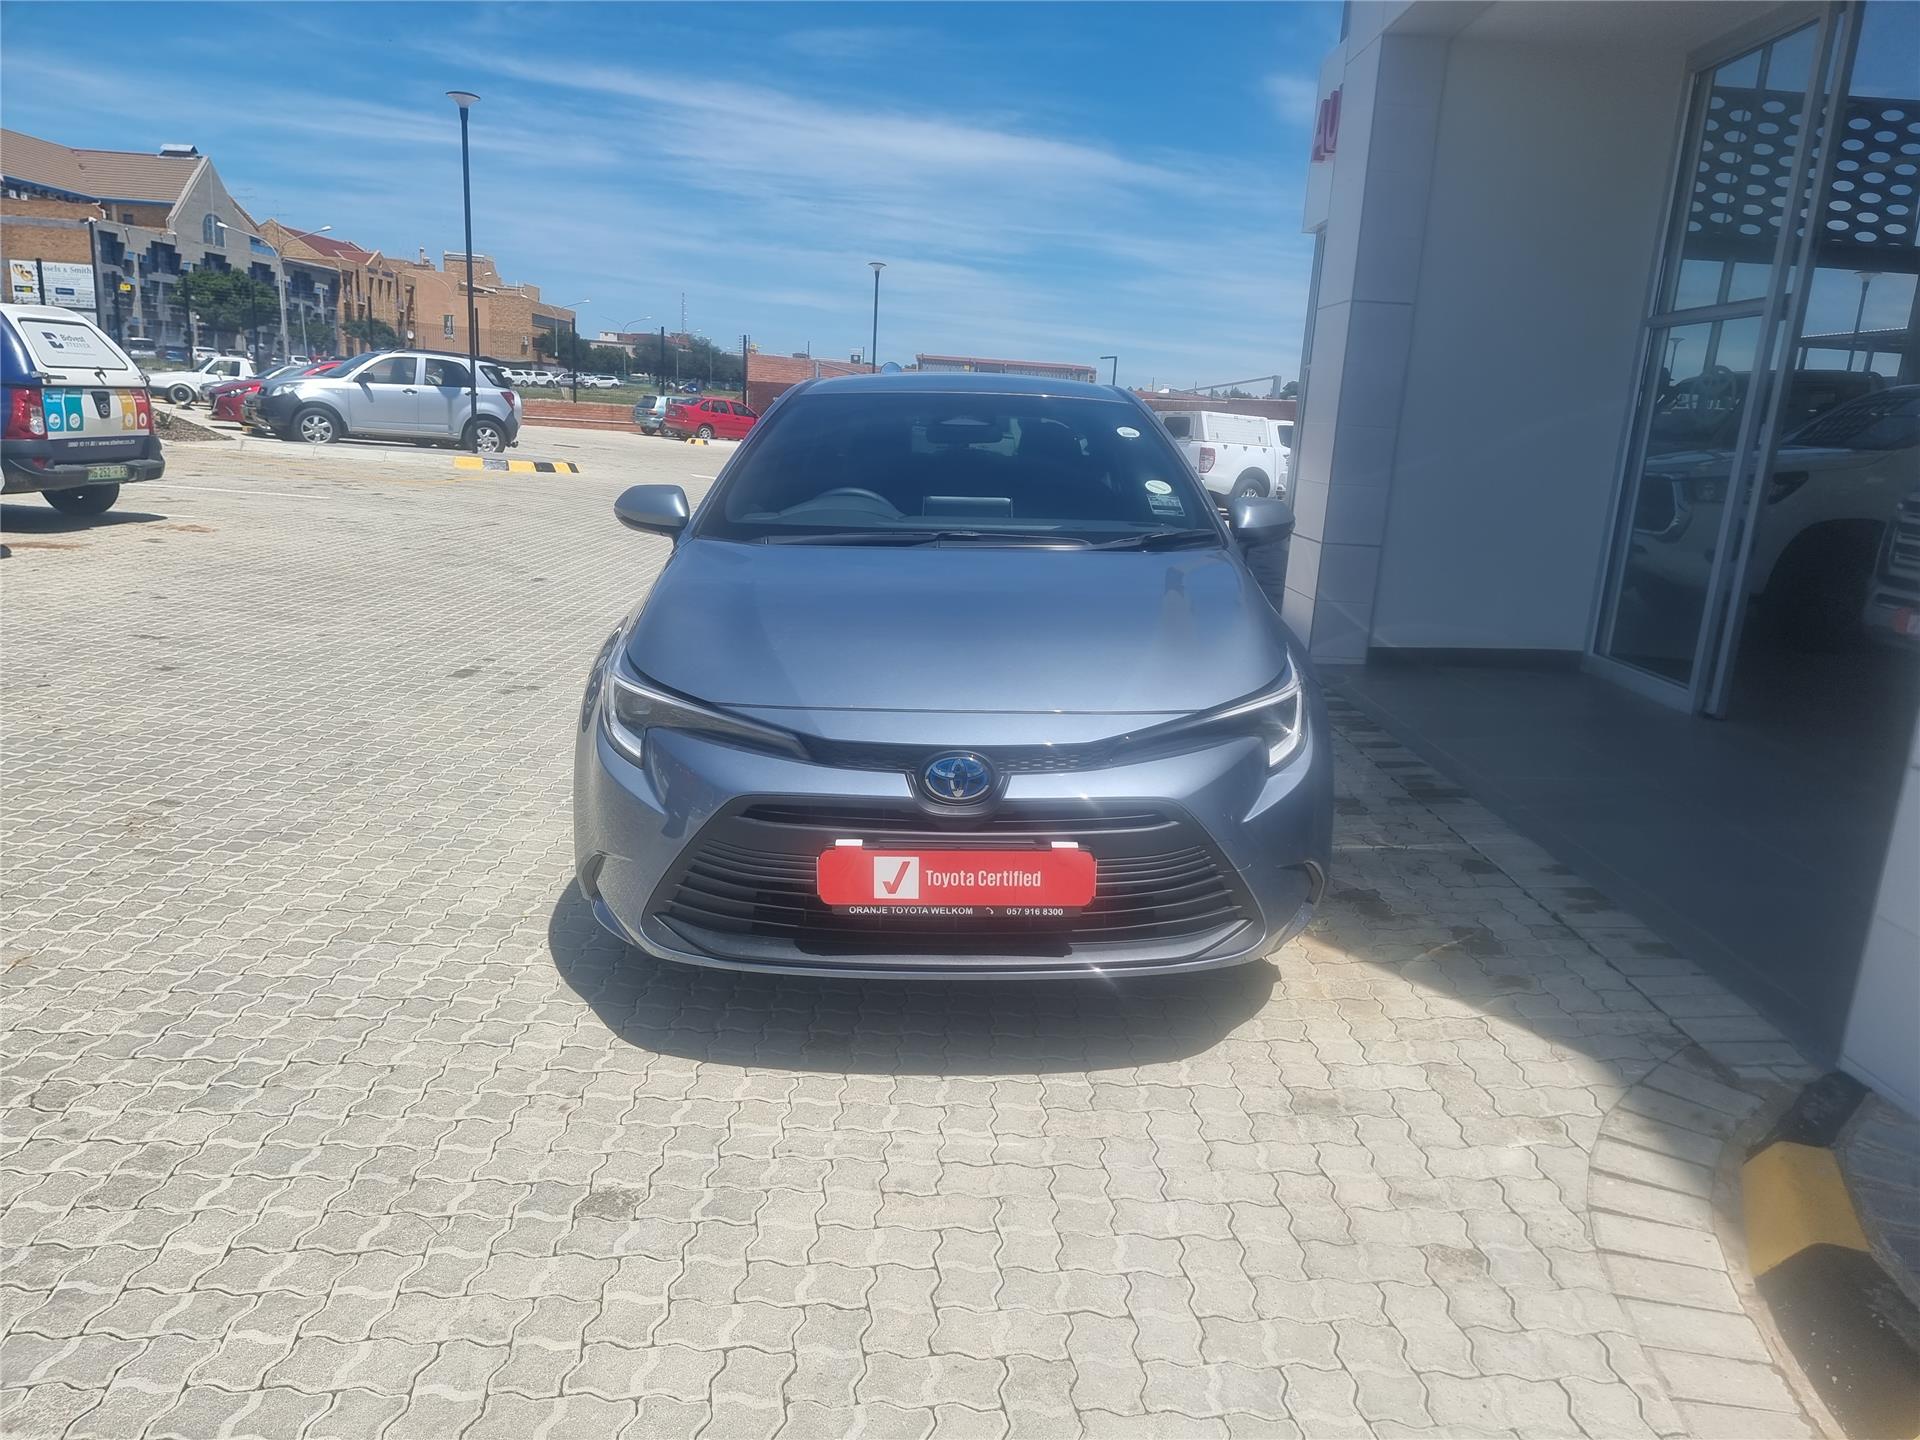 Demo 2024 Toyota Corolla for sale in Welkom Free State ID 1090272/1